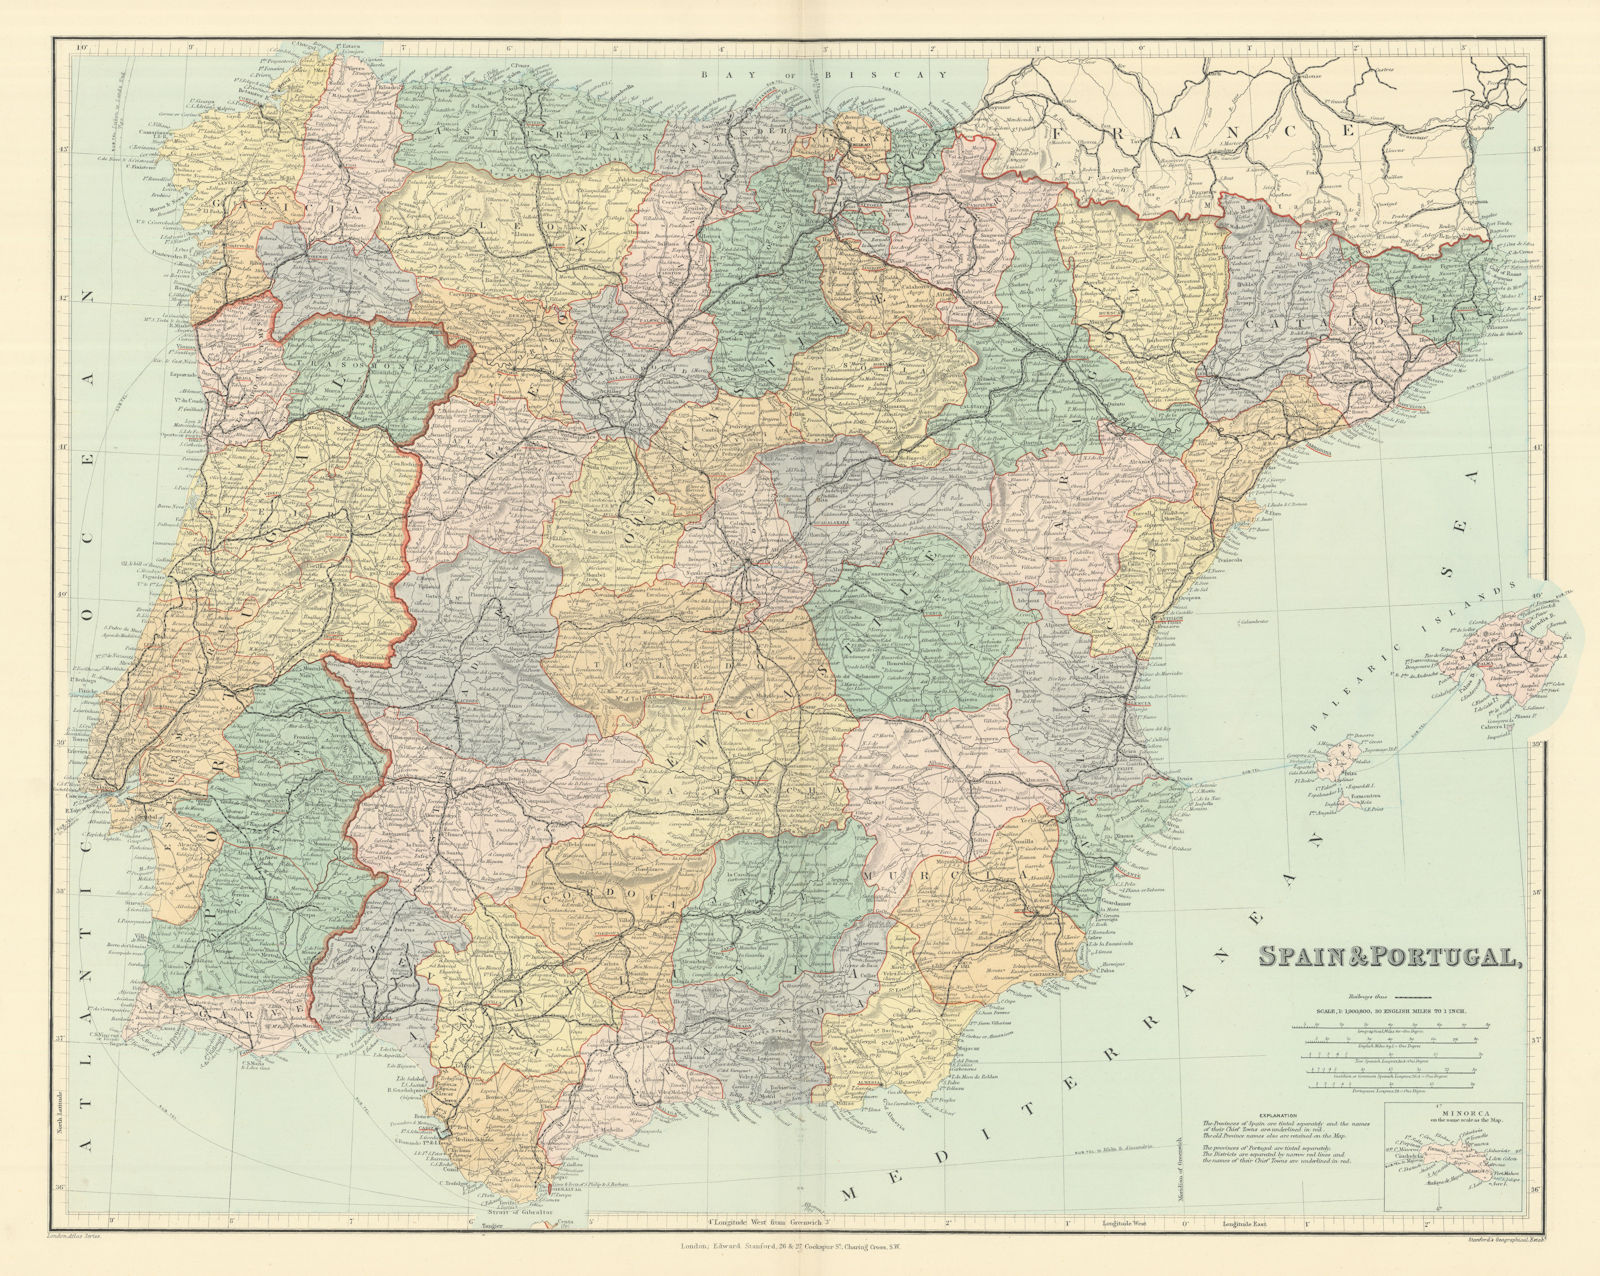 Spain & Portugal. Iberia. Railways. Large 52x65cm. STANFORD 1894 old map